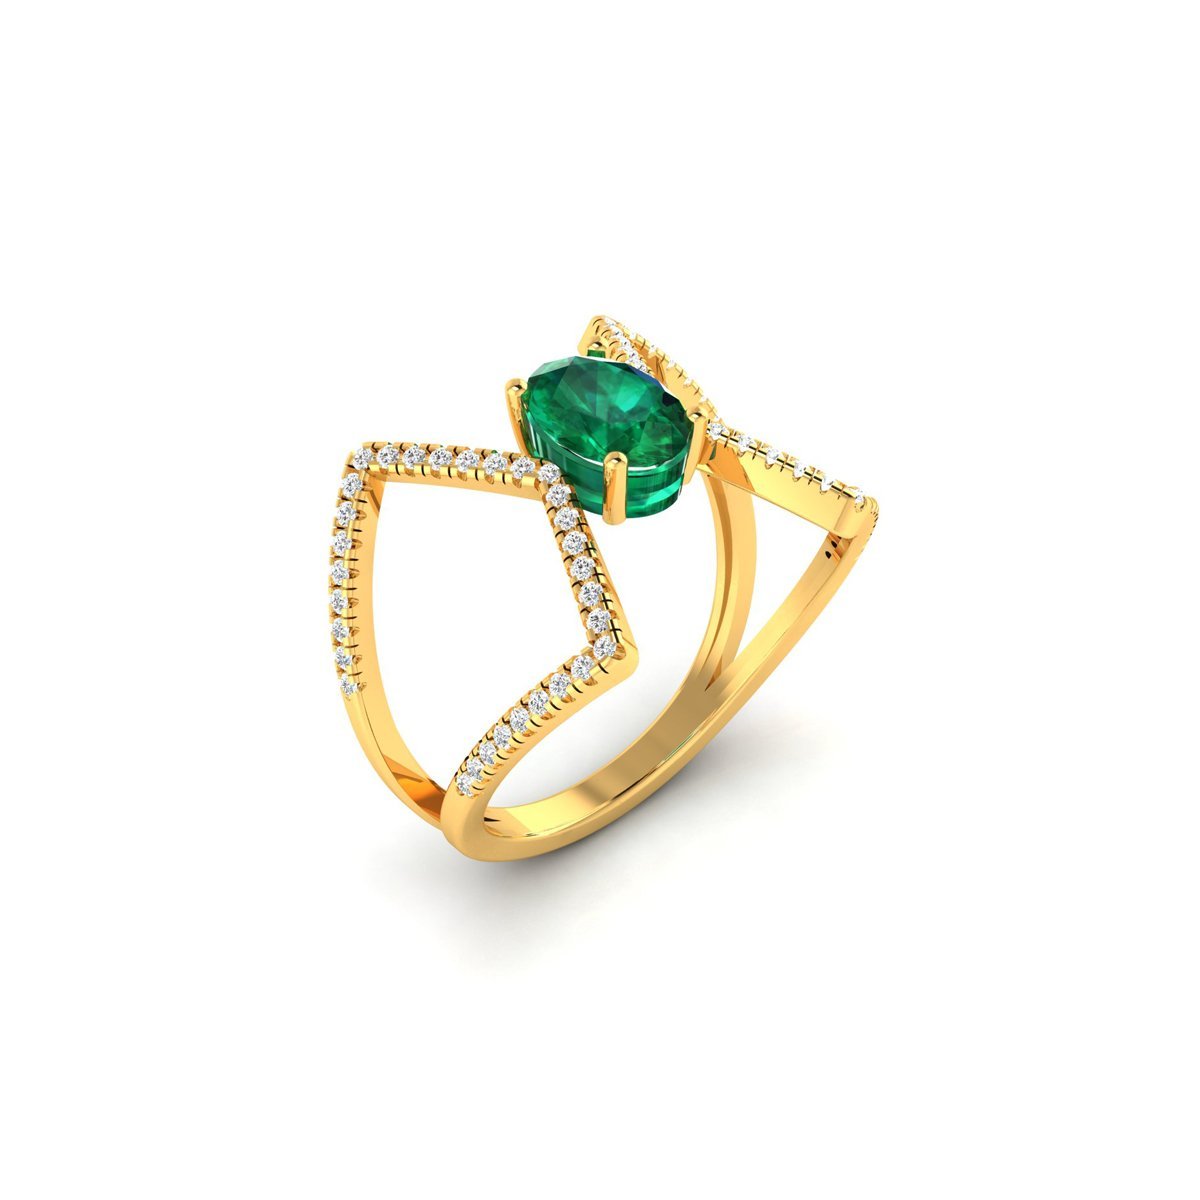 Buy quality Gold Green Stone Ring in Ahmedabad